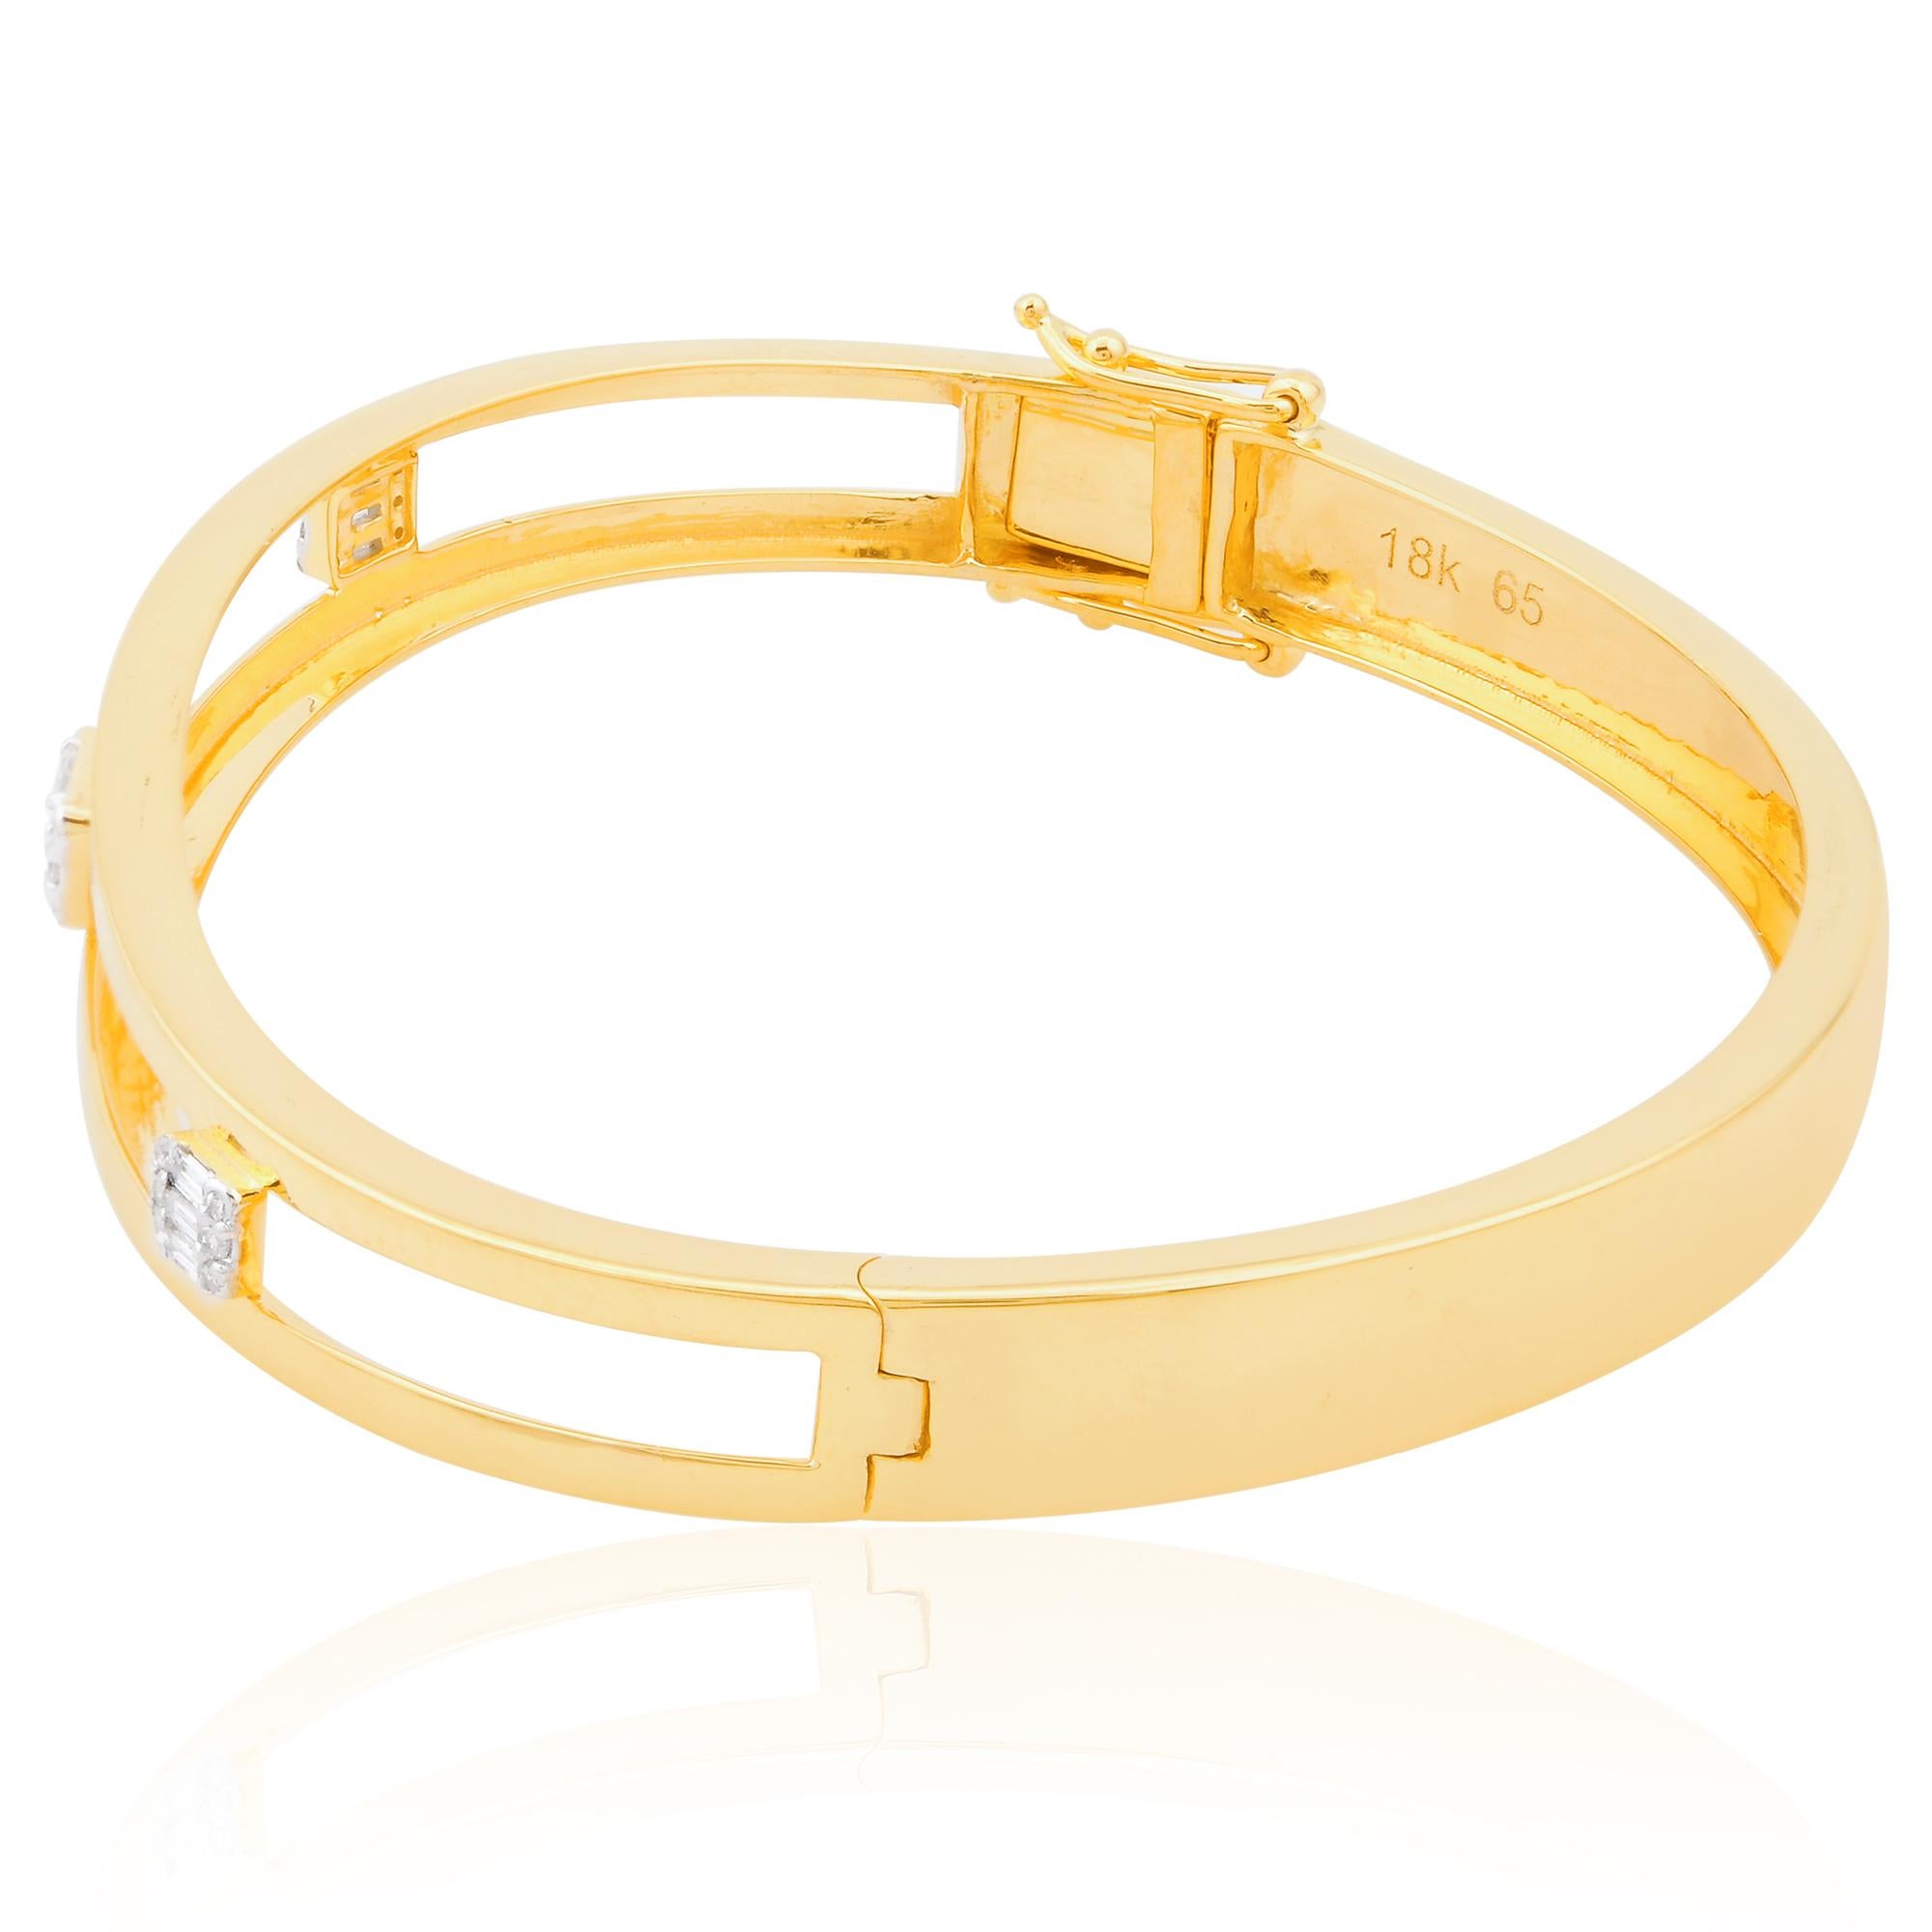 Designed for both elegance and versatility, this bangle bracelet effortlessly transitions from day to night, adding a touch of glamour to any ensemble. Whether worn alone for understated sophistication or layered with other bracelets for a more